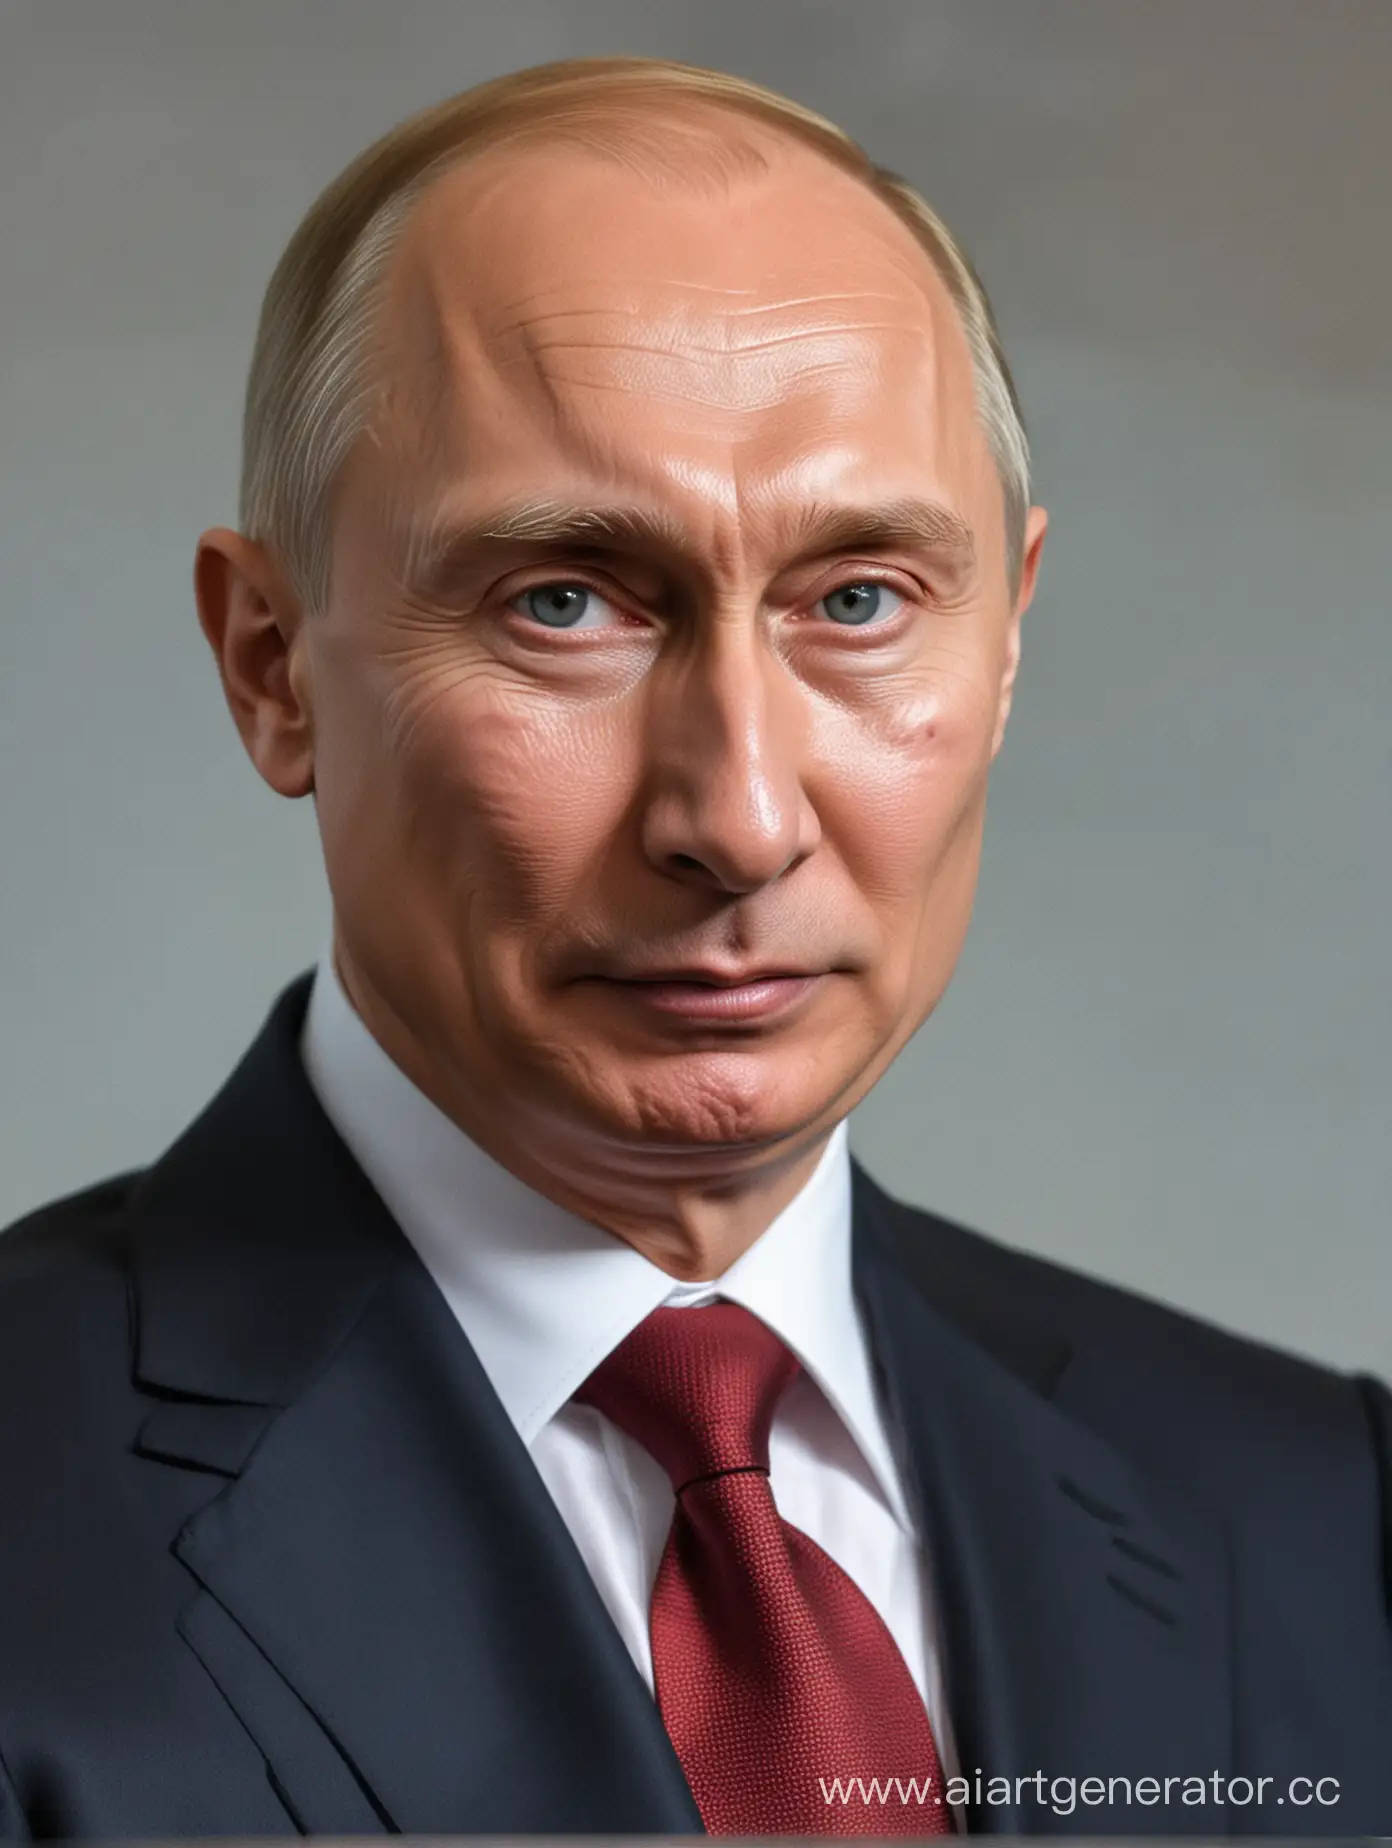 The president of the Russian Federation, Vladimir Putin, loves cryptocurrency